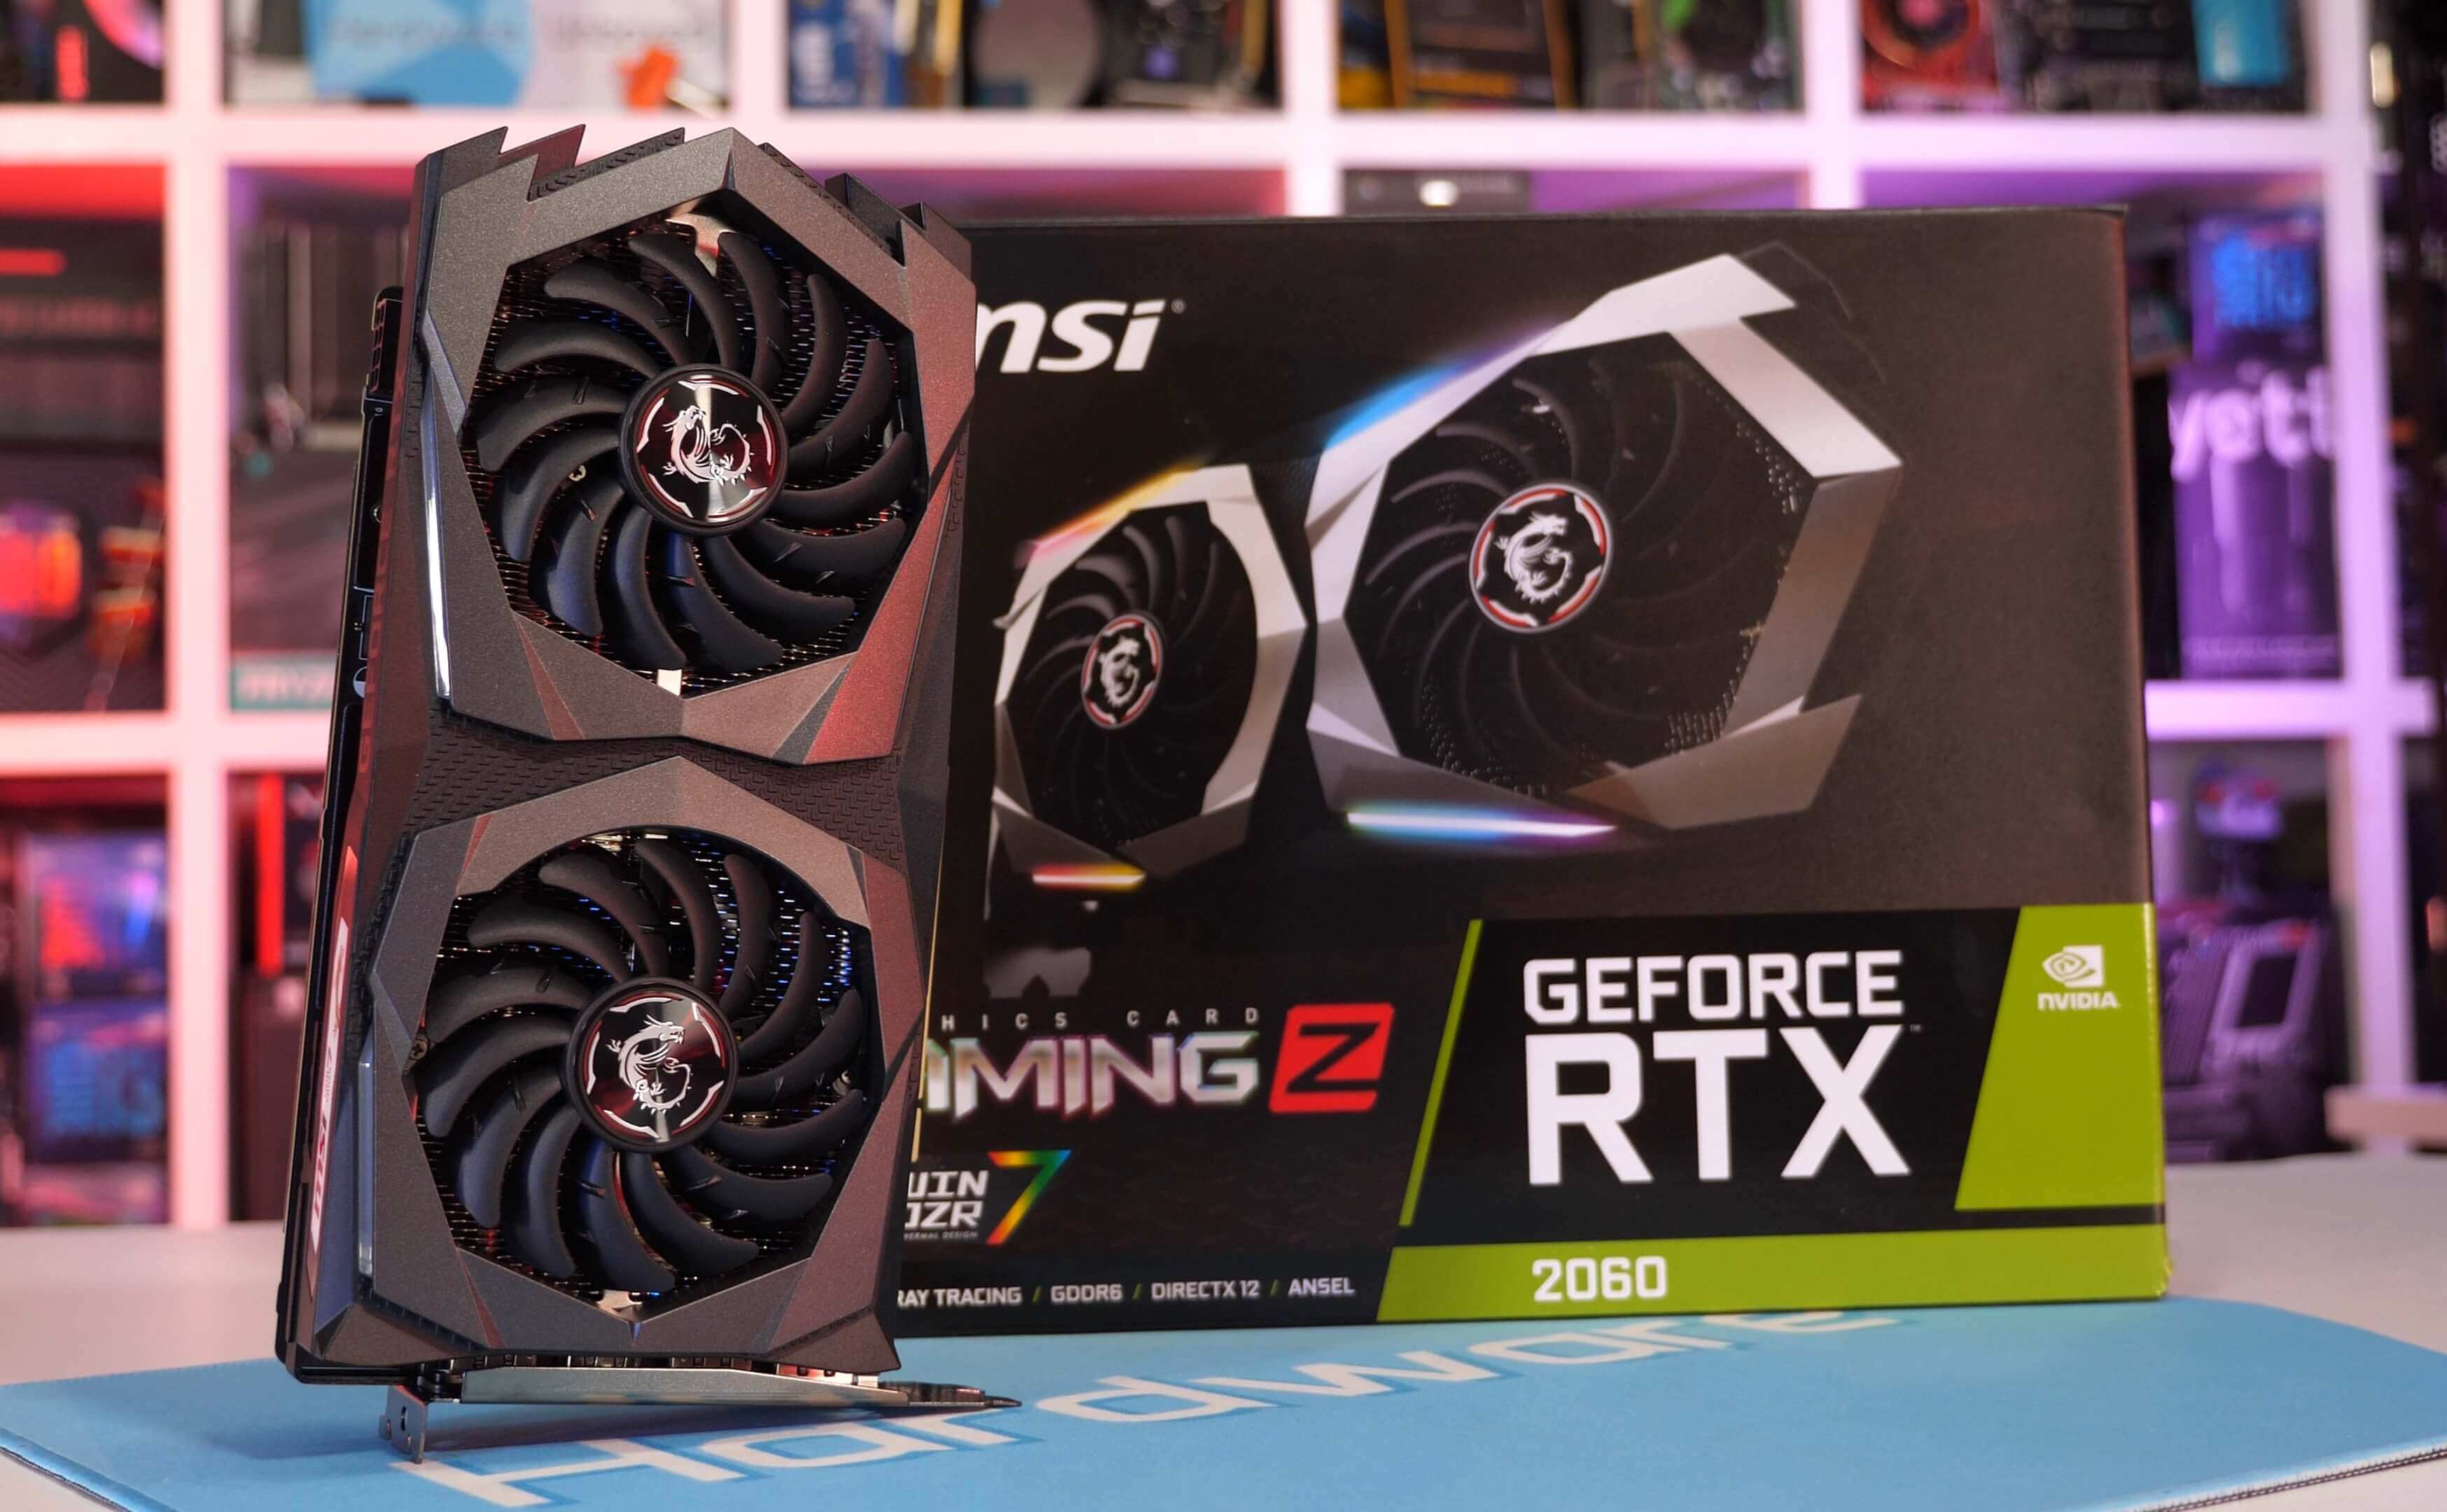 Nvidia takes $50 off the RTX 2060, making it butt heads with the 5600 XT at $299